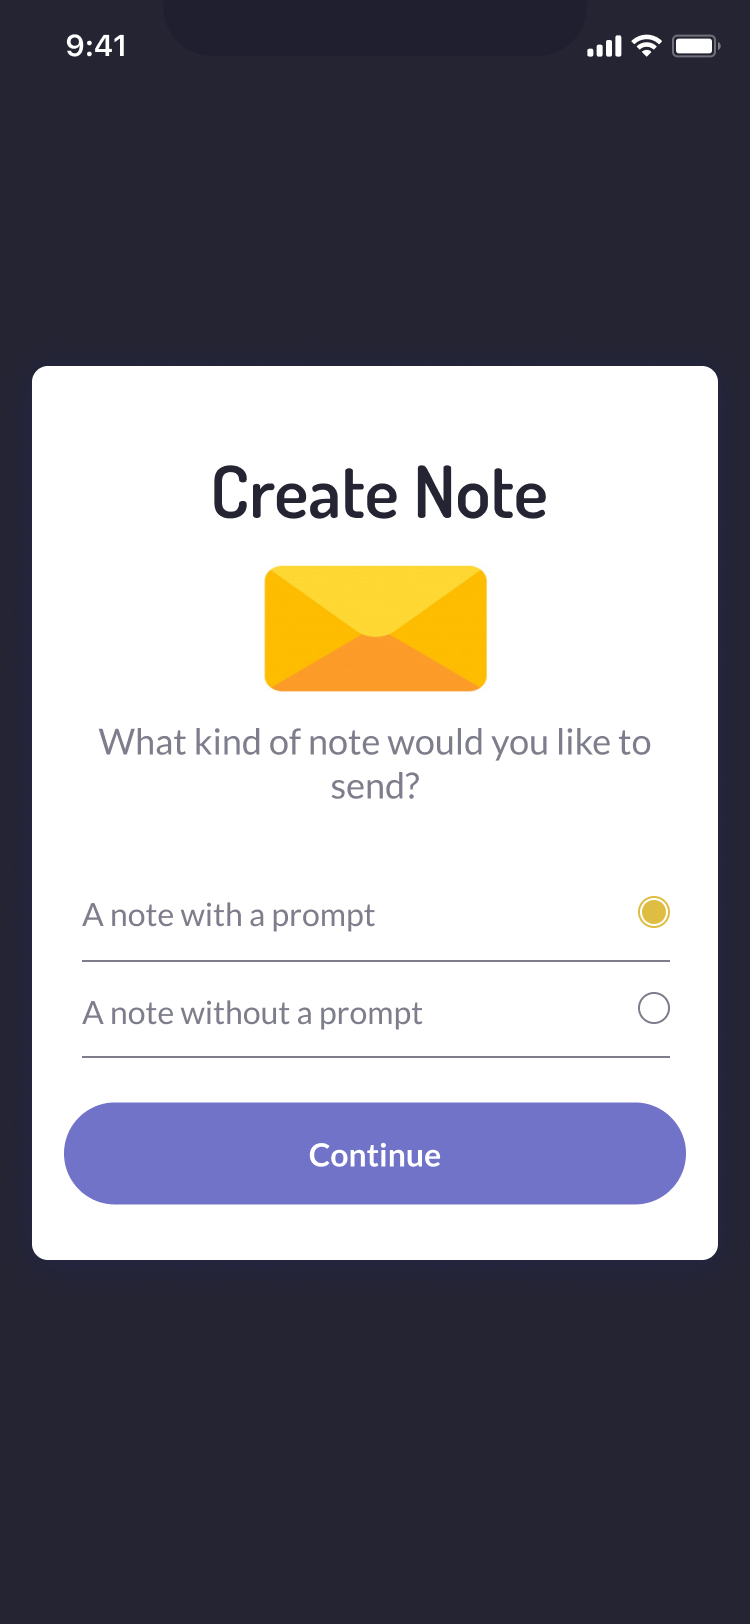 Note prompt type select screen